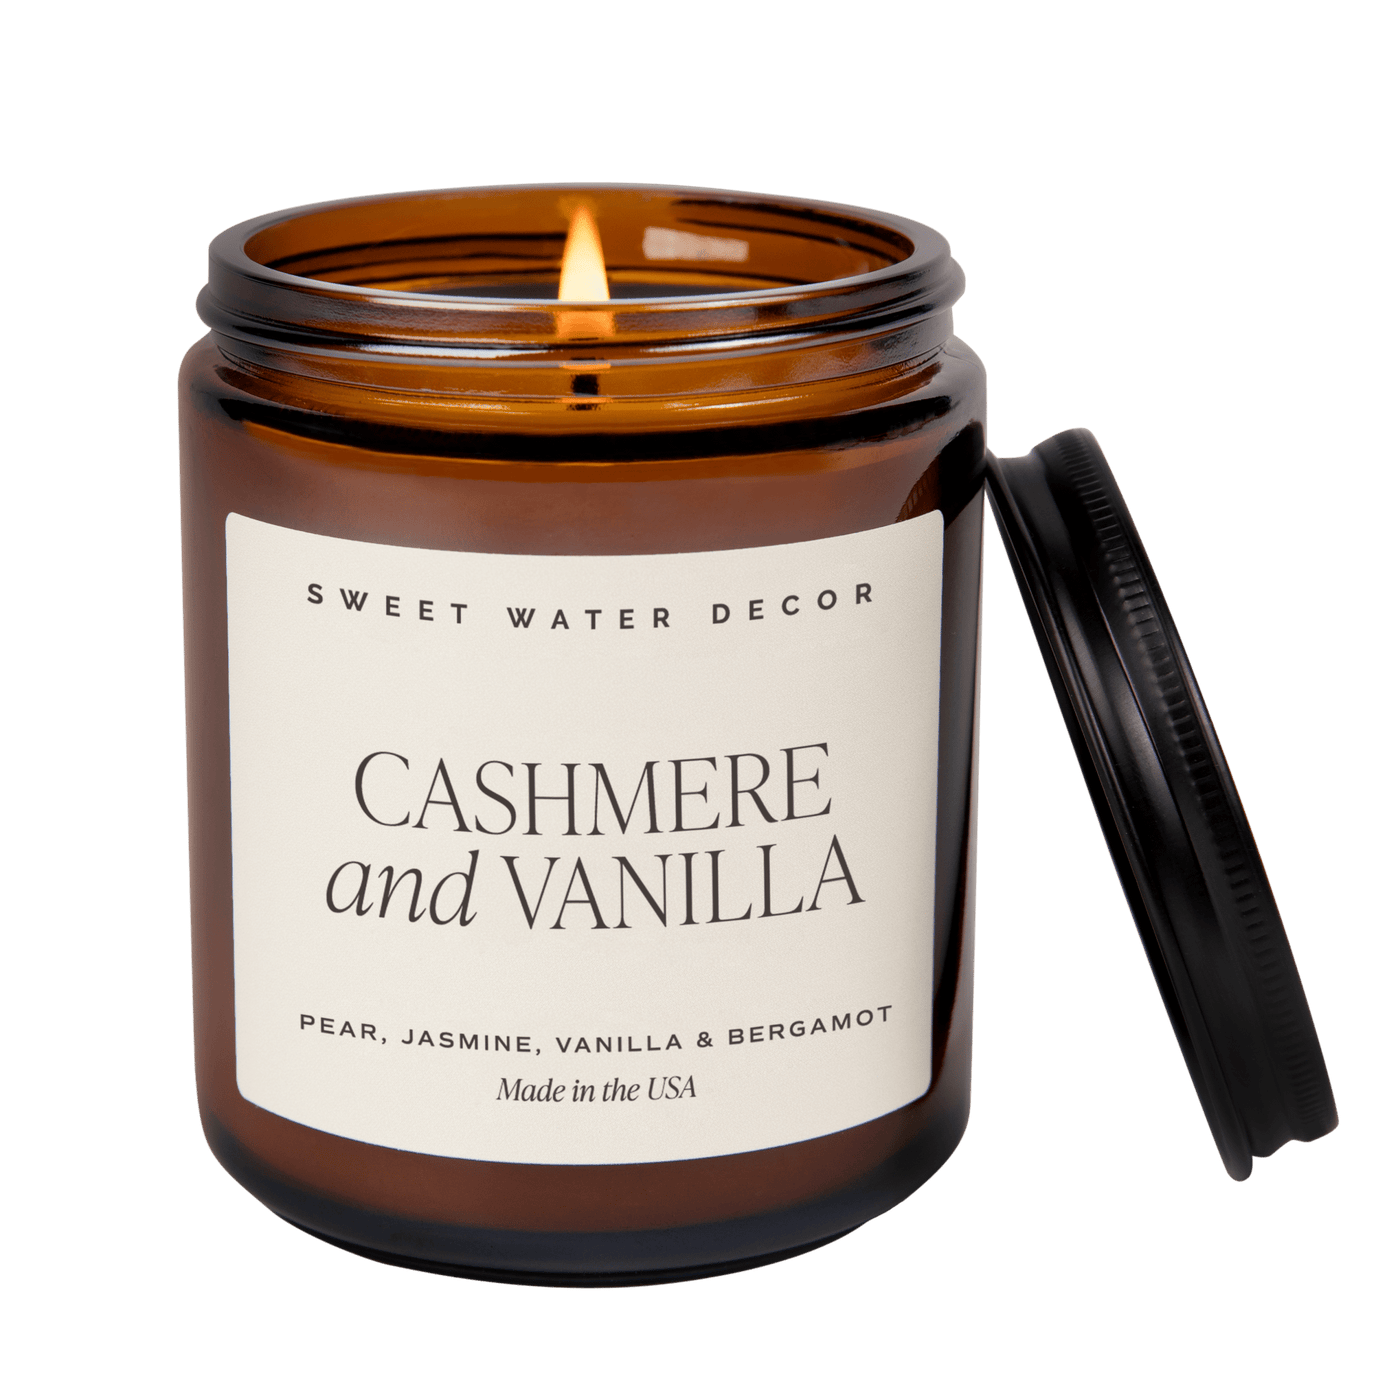 Cashmere and Vanilla Soy Candle - Amber Jar - 9 oz - Sweet Water Decor - Candles